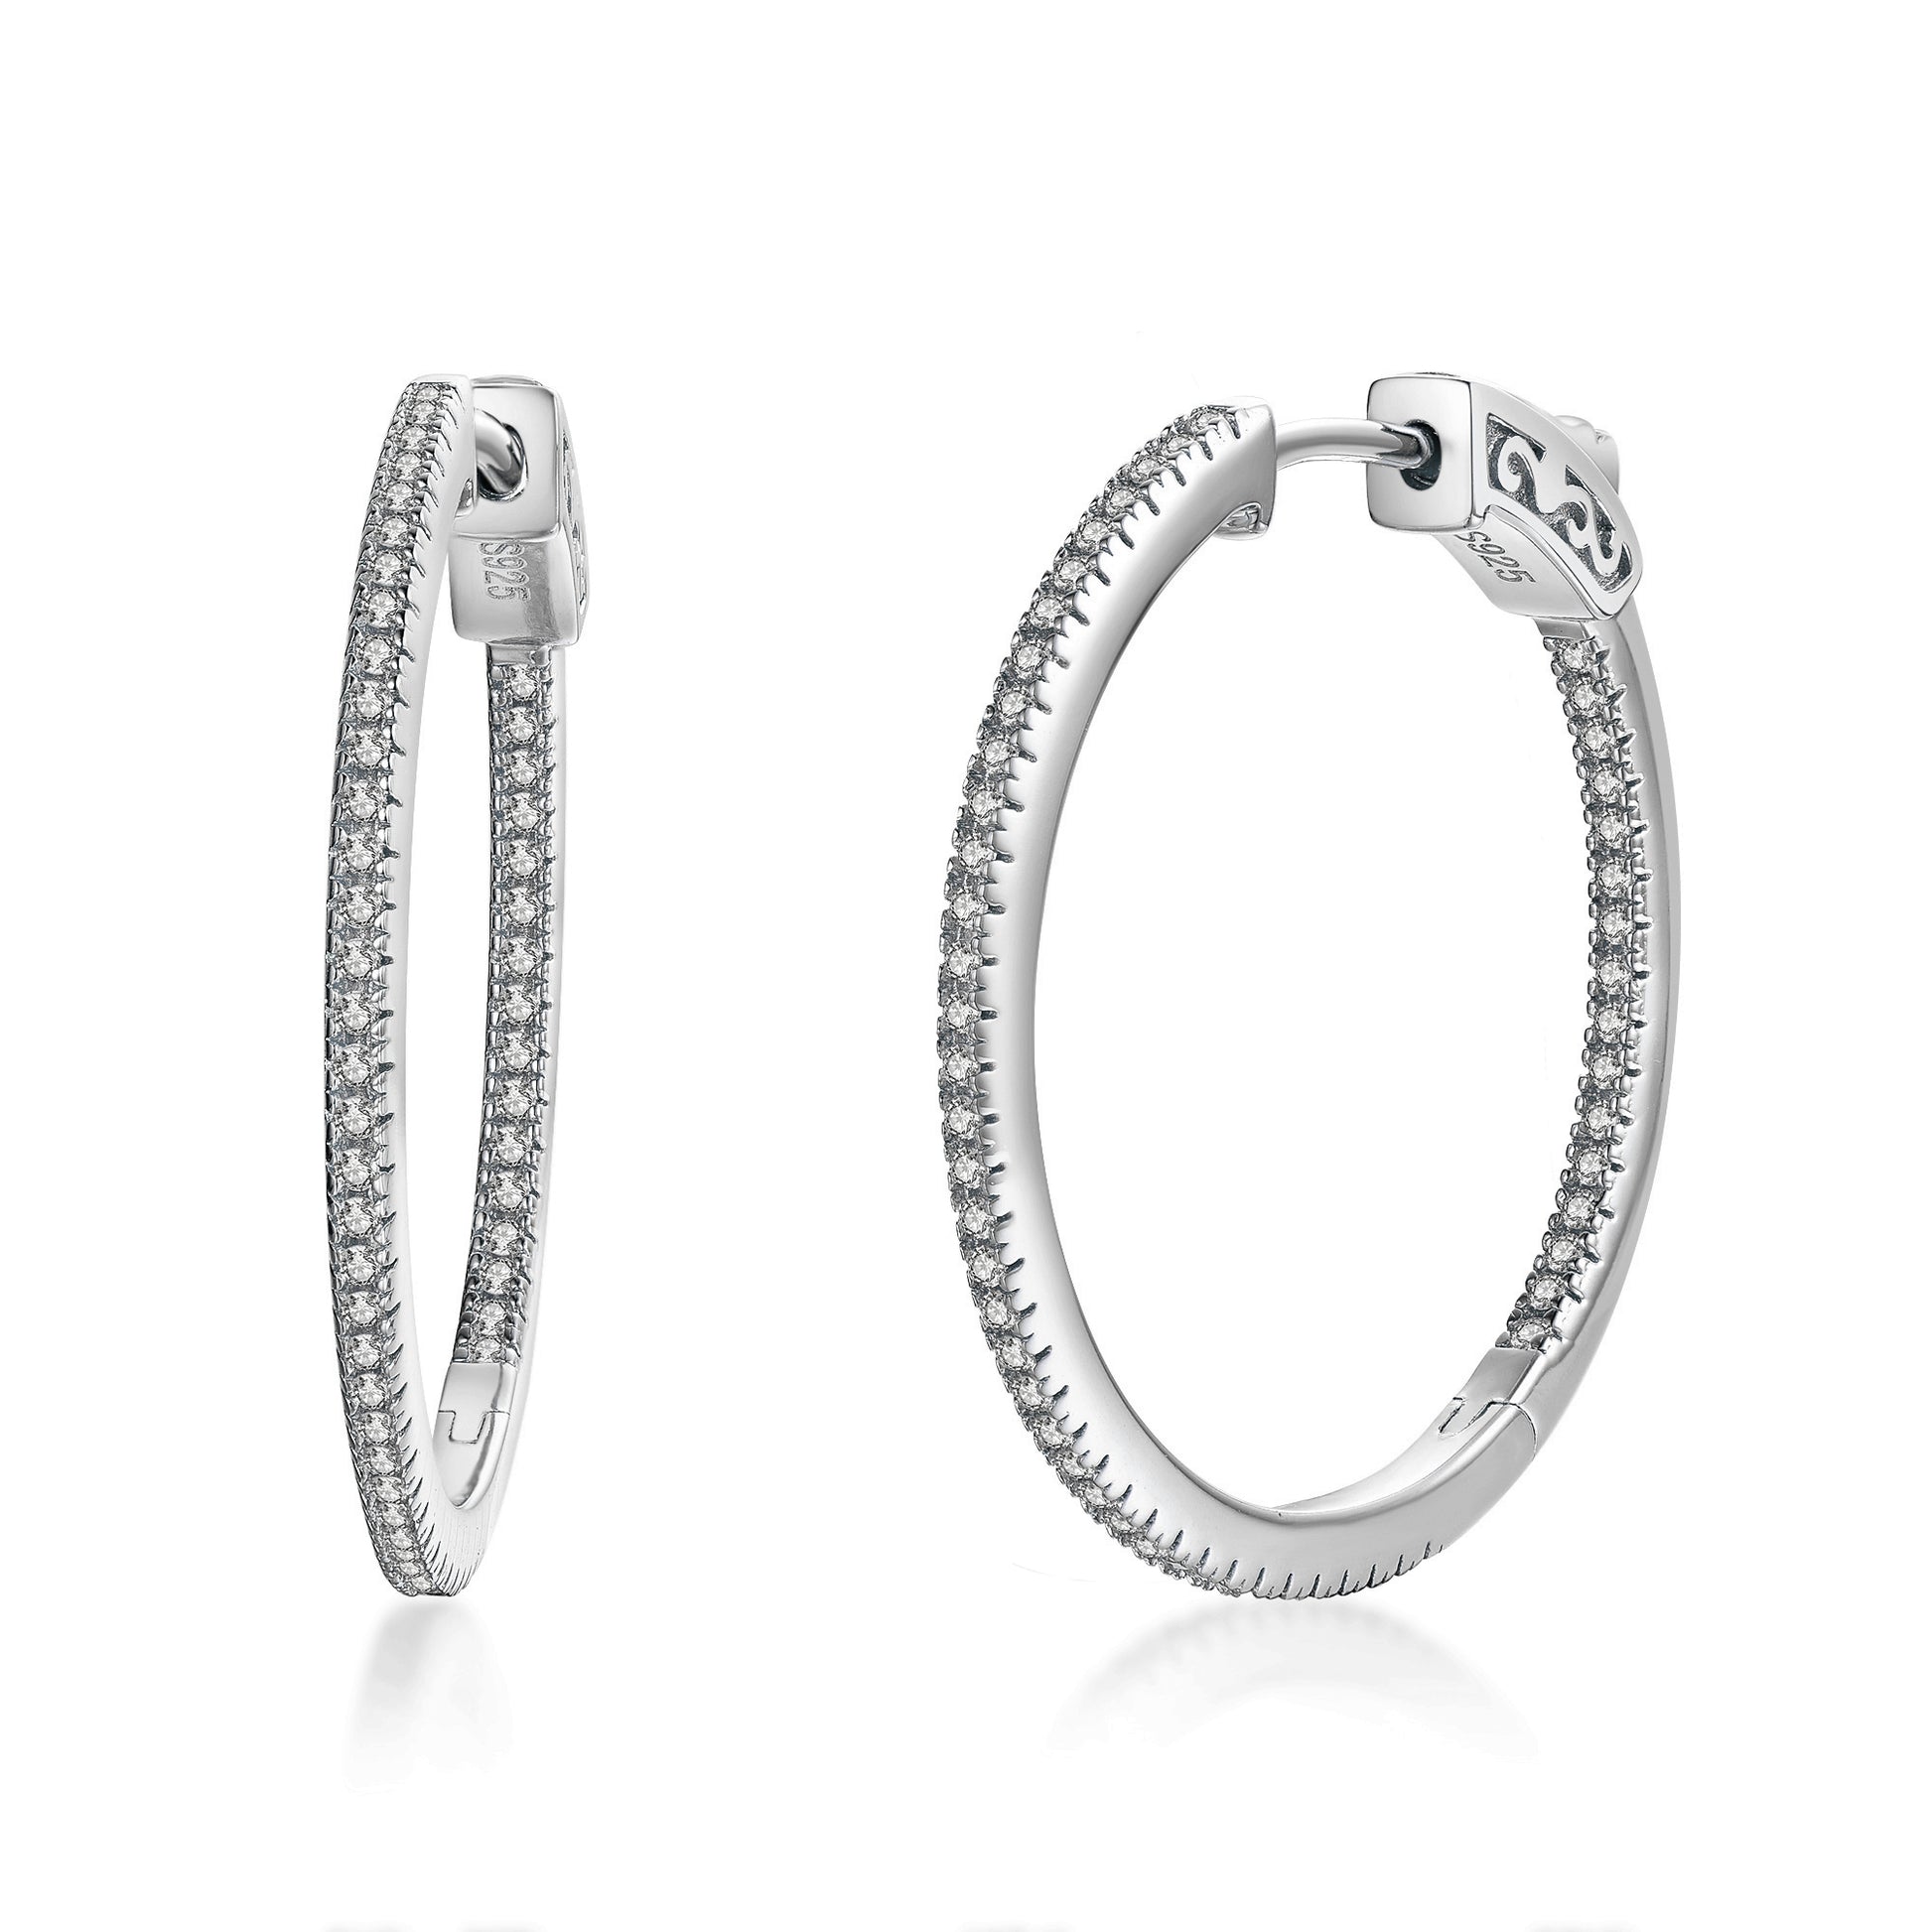 Sterling Silver 30mm Round CZ Hoop Earrings with 1mm CZs - HK Jewels